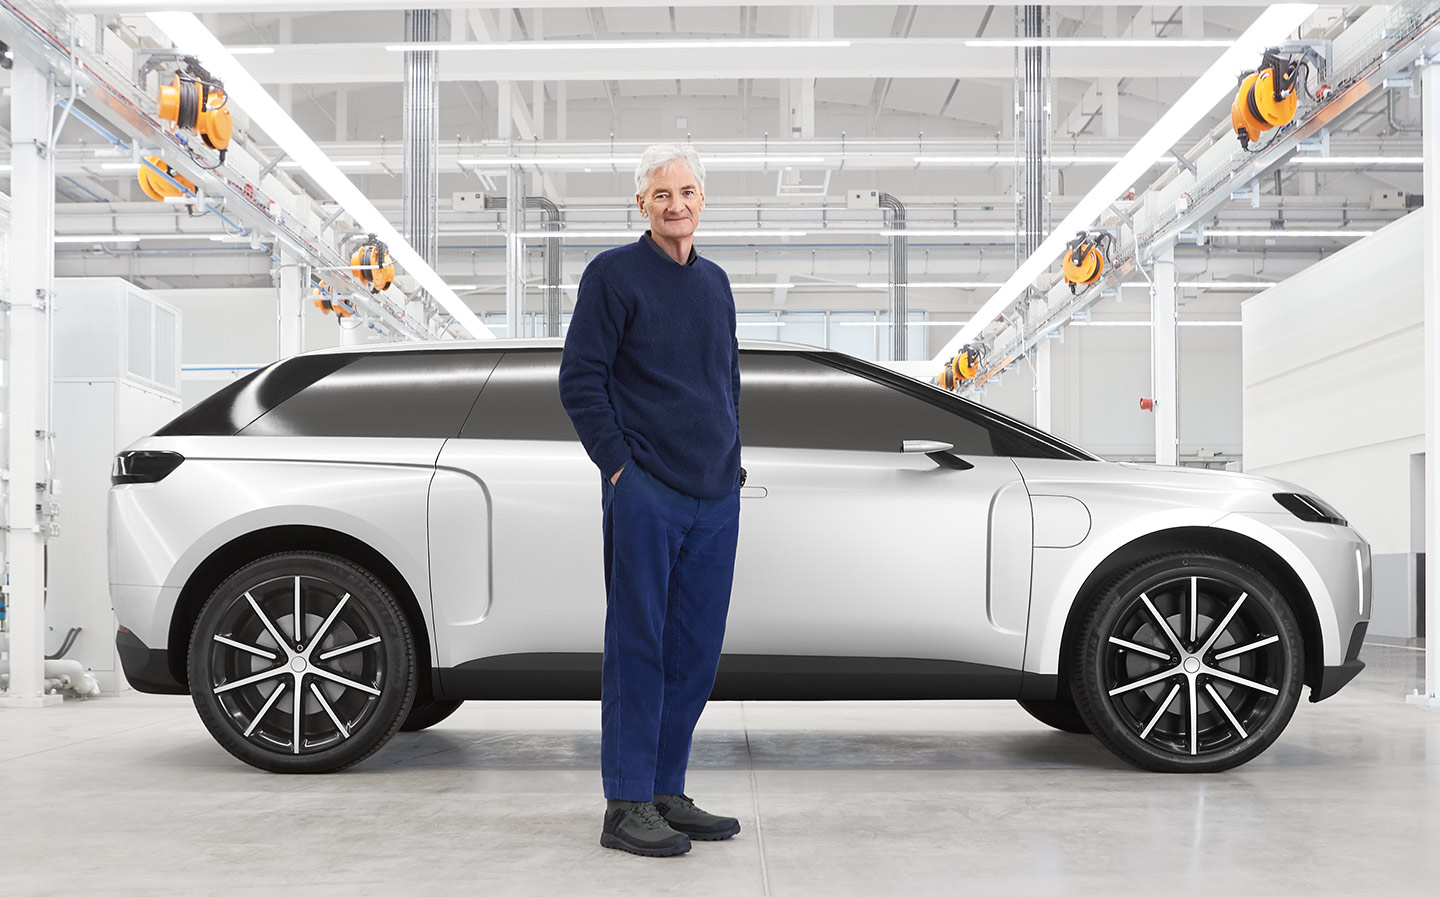 Dyson electric car: First proper look at James Dyson's failed electric car as entrepreneur tops Sunday Times Rich List for first time